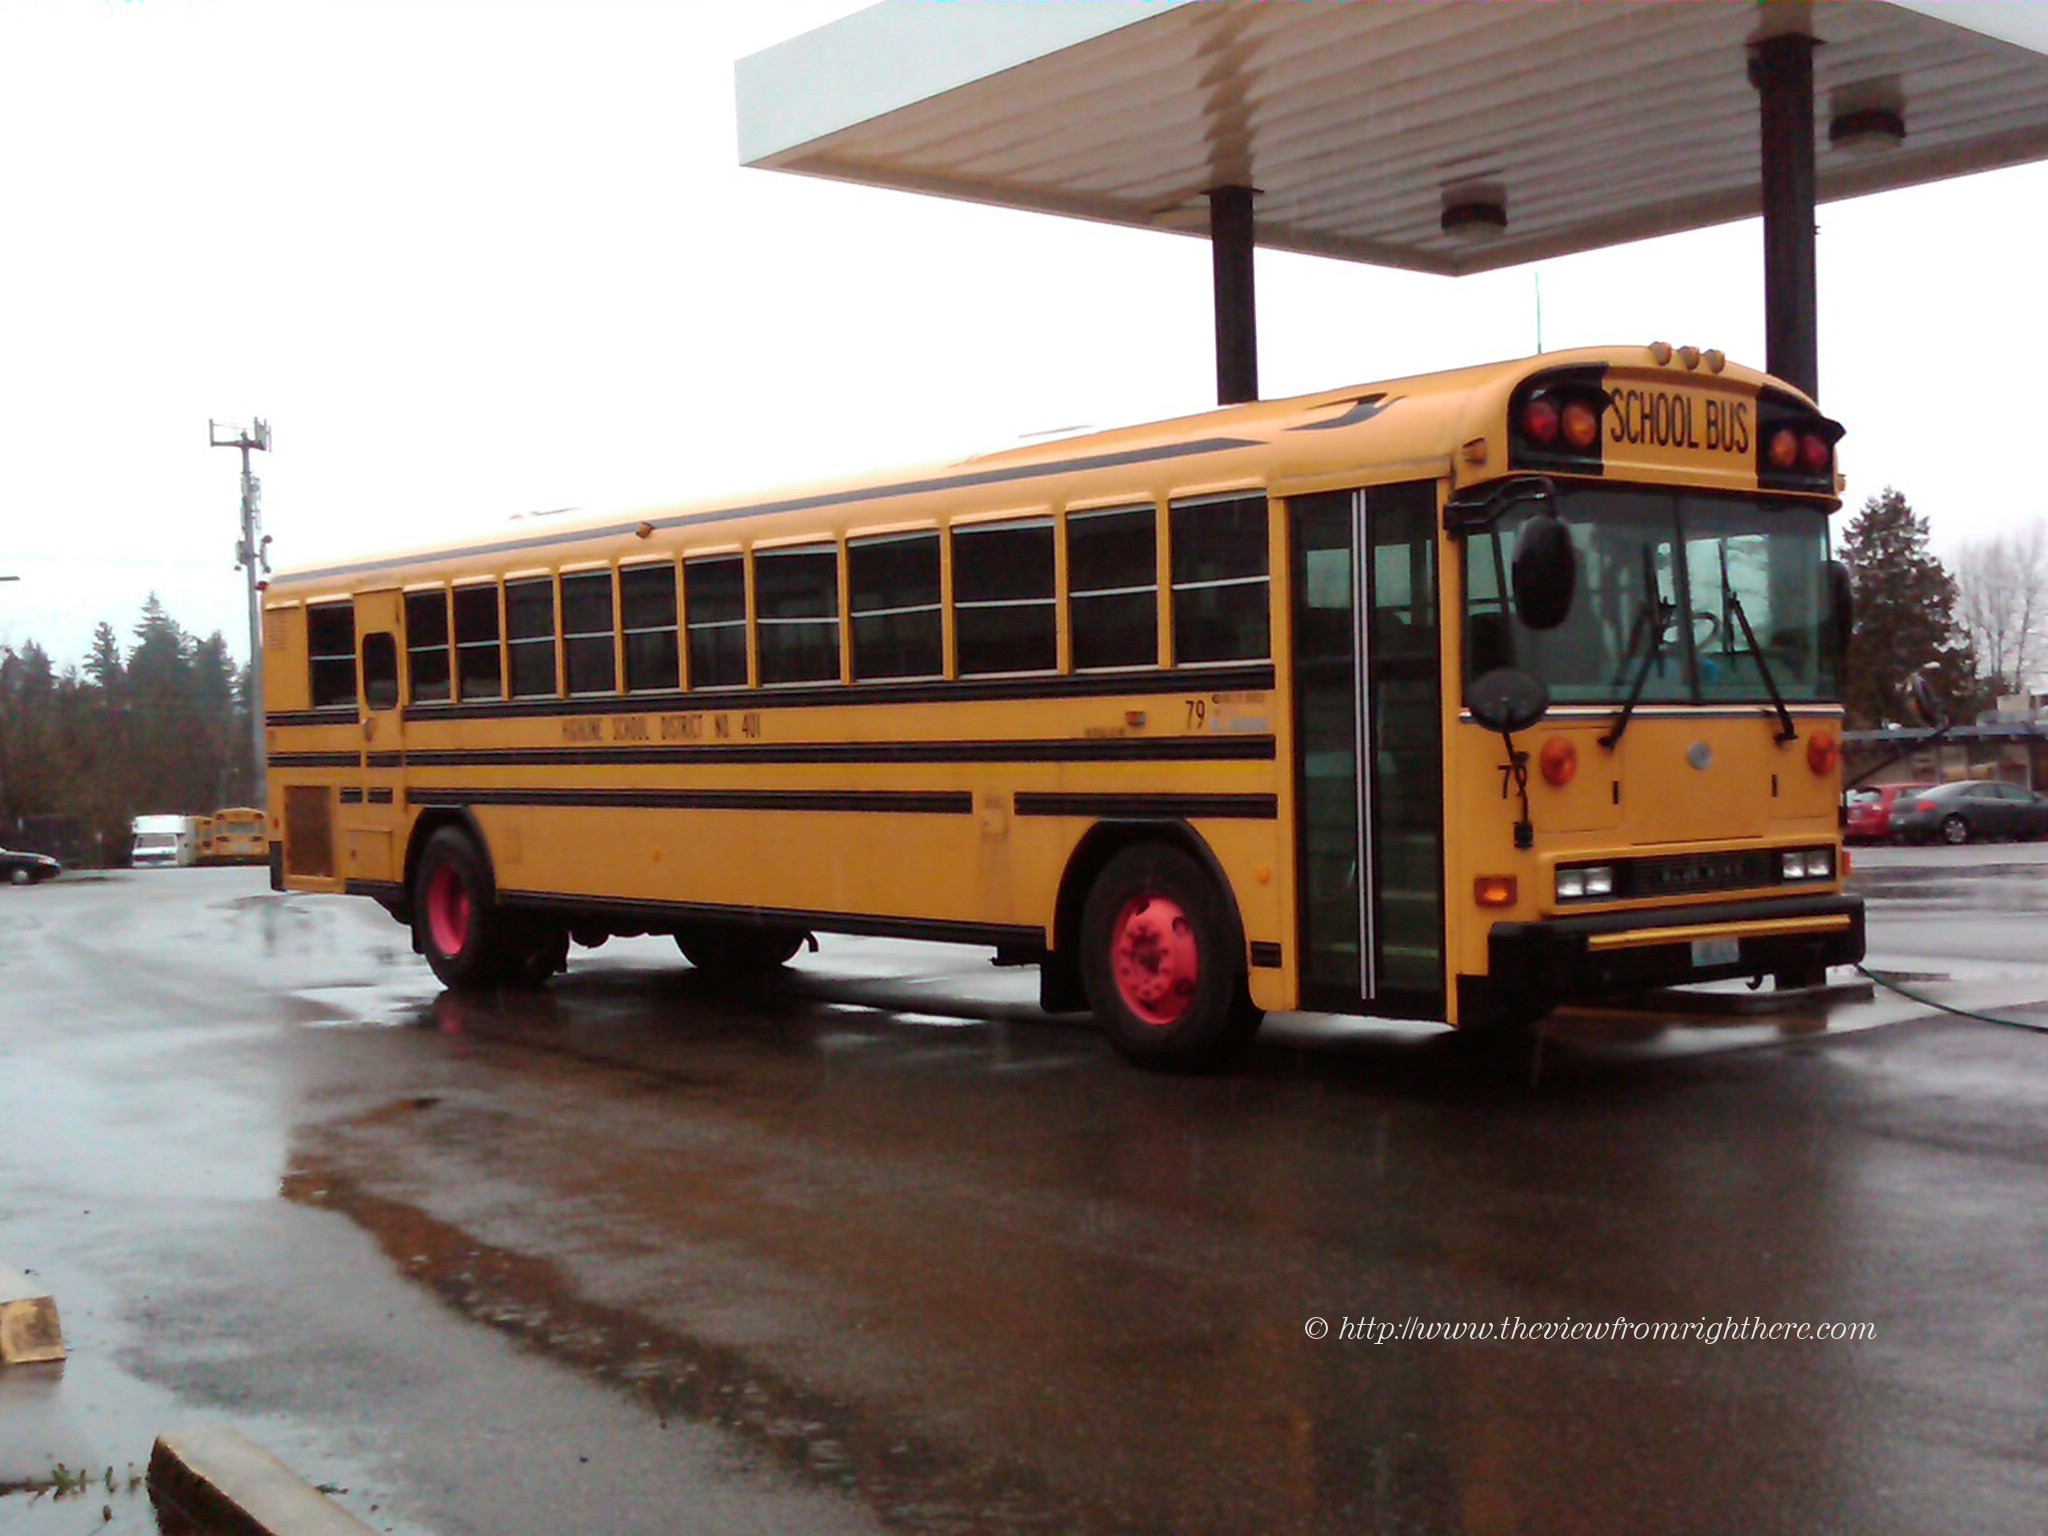 Retirees’ Last Day – School Bus with Pink Wheels